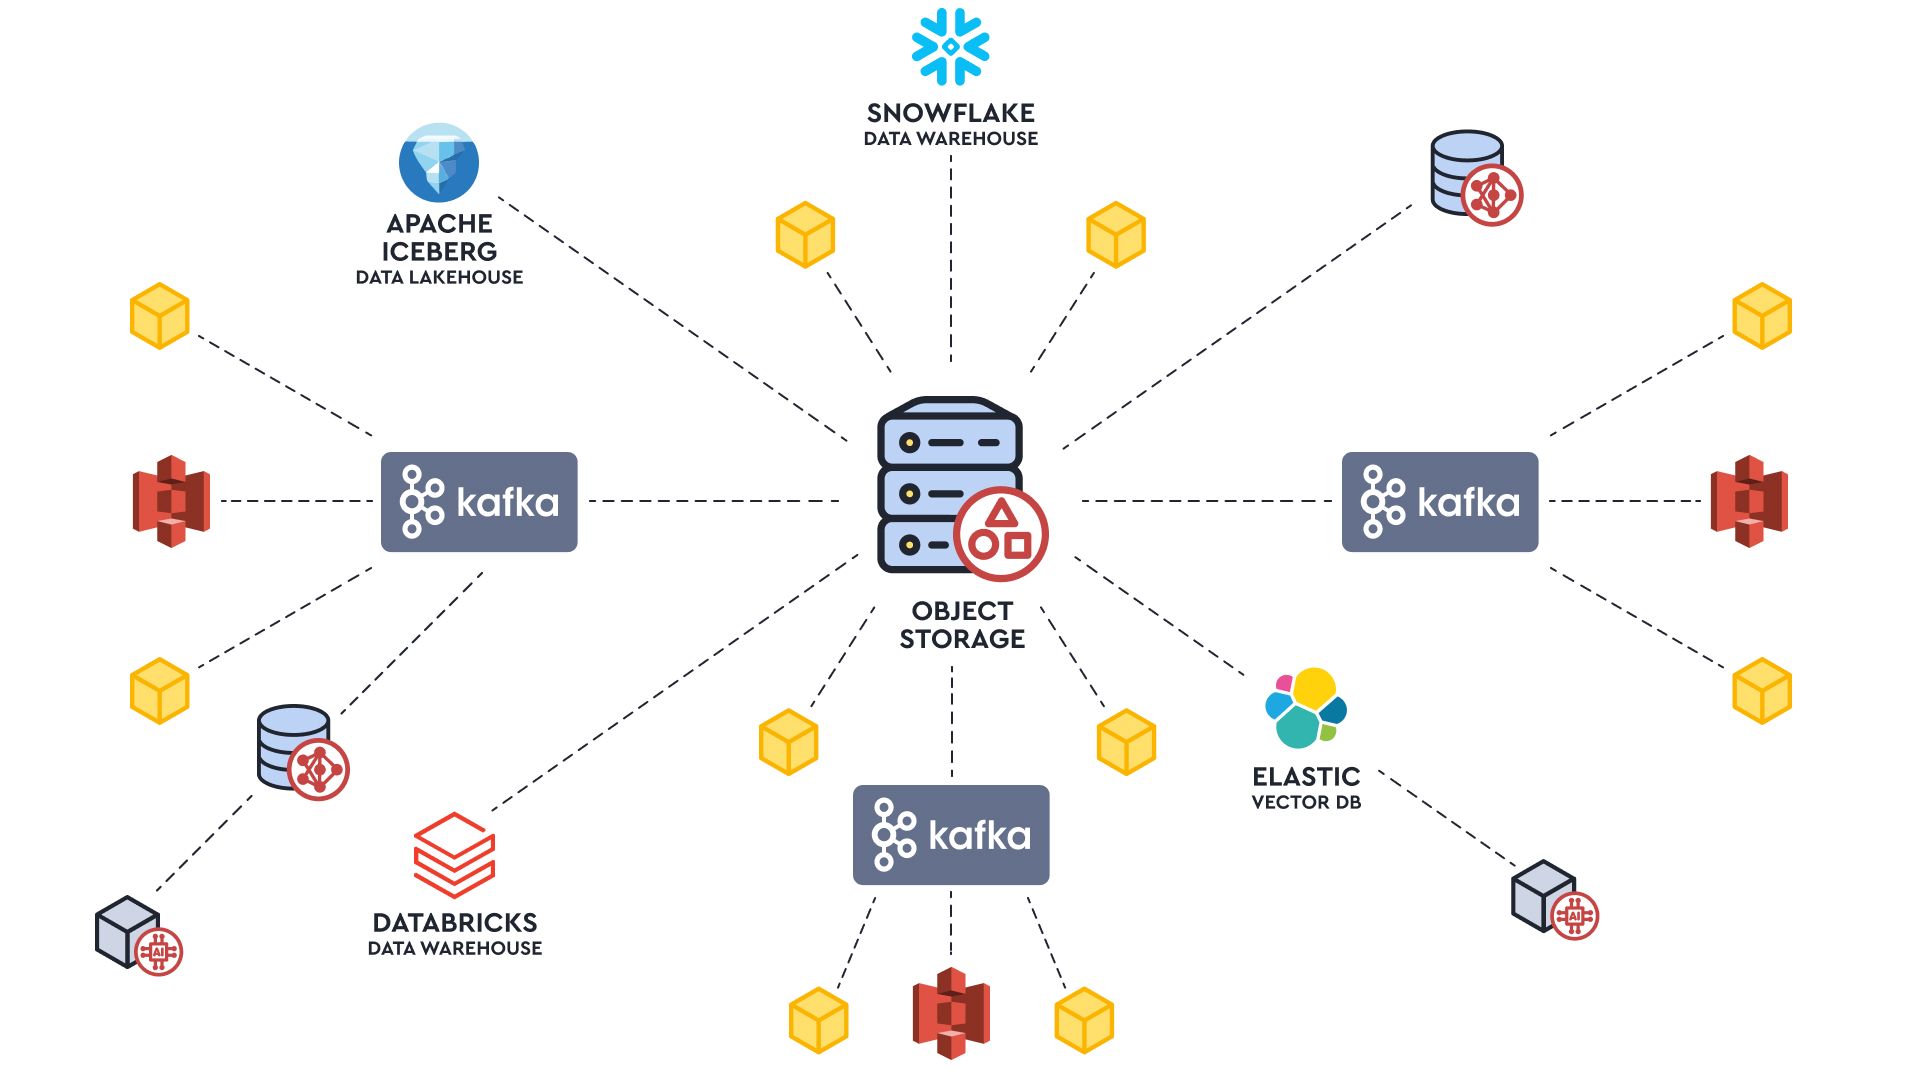 A distributed data architecture with data replication and data sharing via object storage.